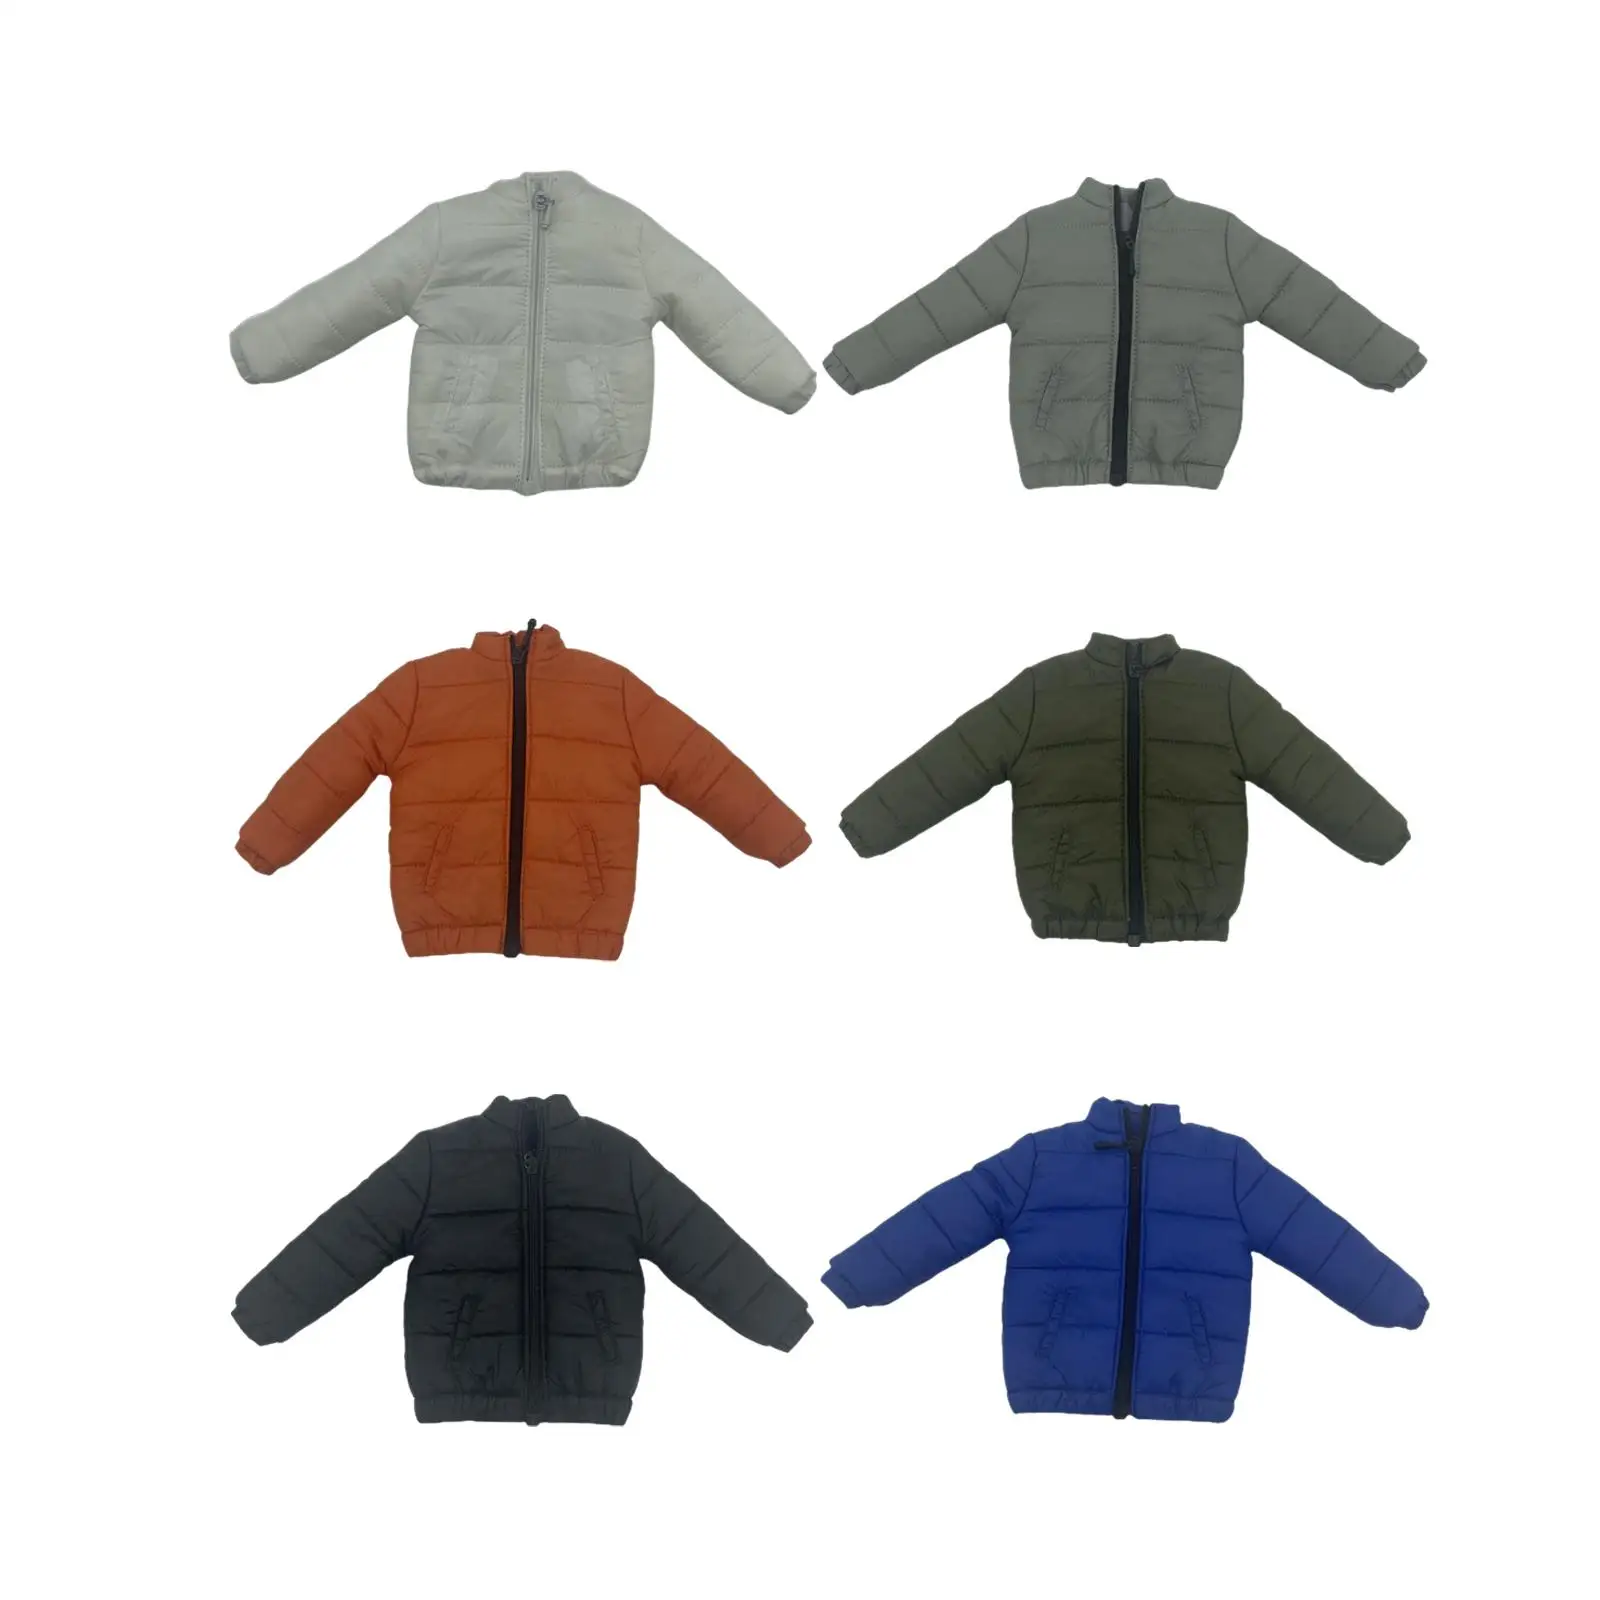 Fashion 1/6 Doll Down Jacket Dress Up Clothing Outfit for 12 in Male Action Figures Doll Model Accessories